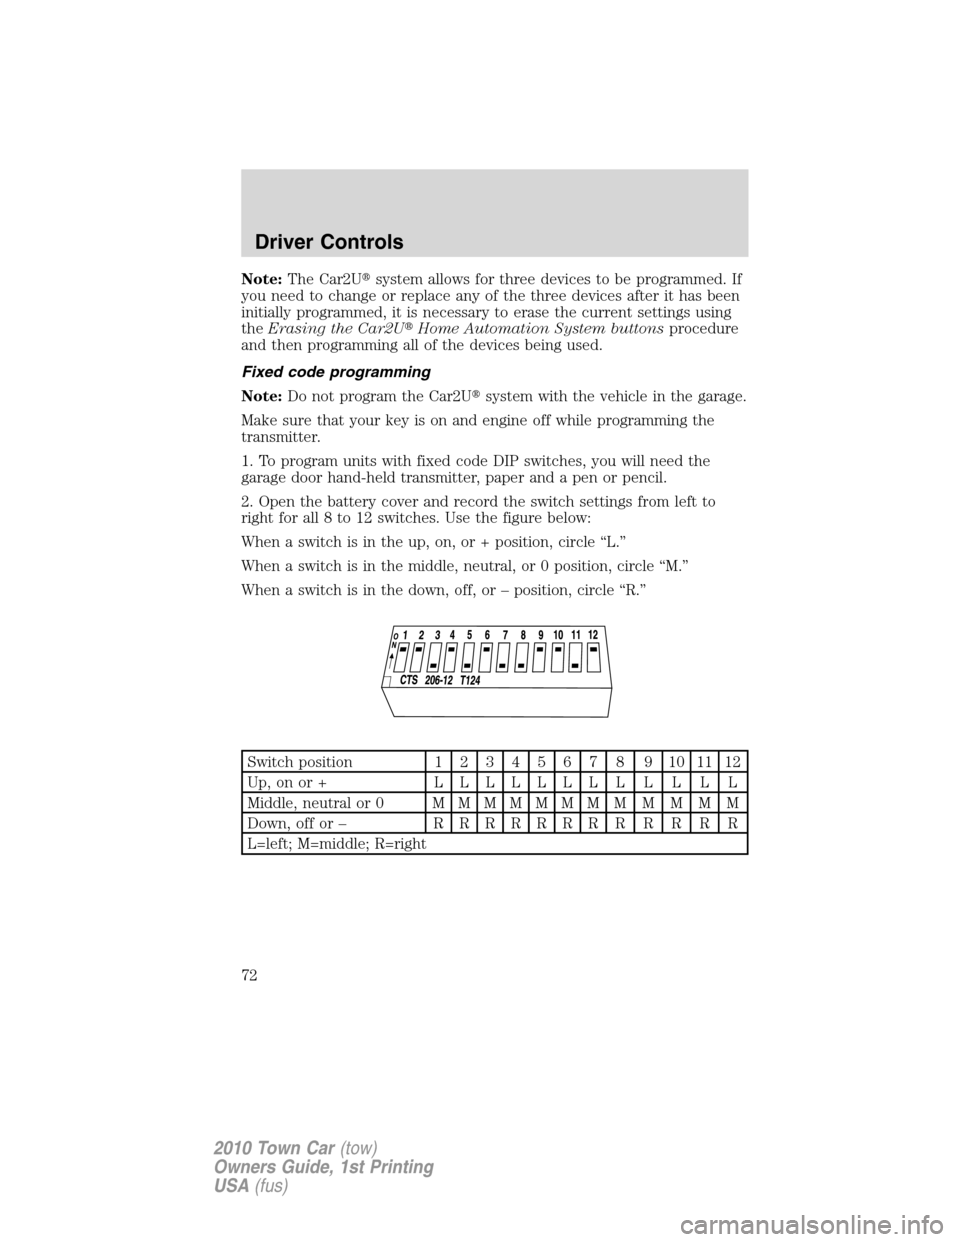 LINCOLN TOWN CAR 2010  Owners Manual Note:The Car2Usystem allows for three devices to be programmed. If
you need to change or replace any of the three devices after it has been
initially programmed, it is necessary to erase the current 